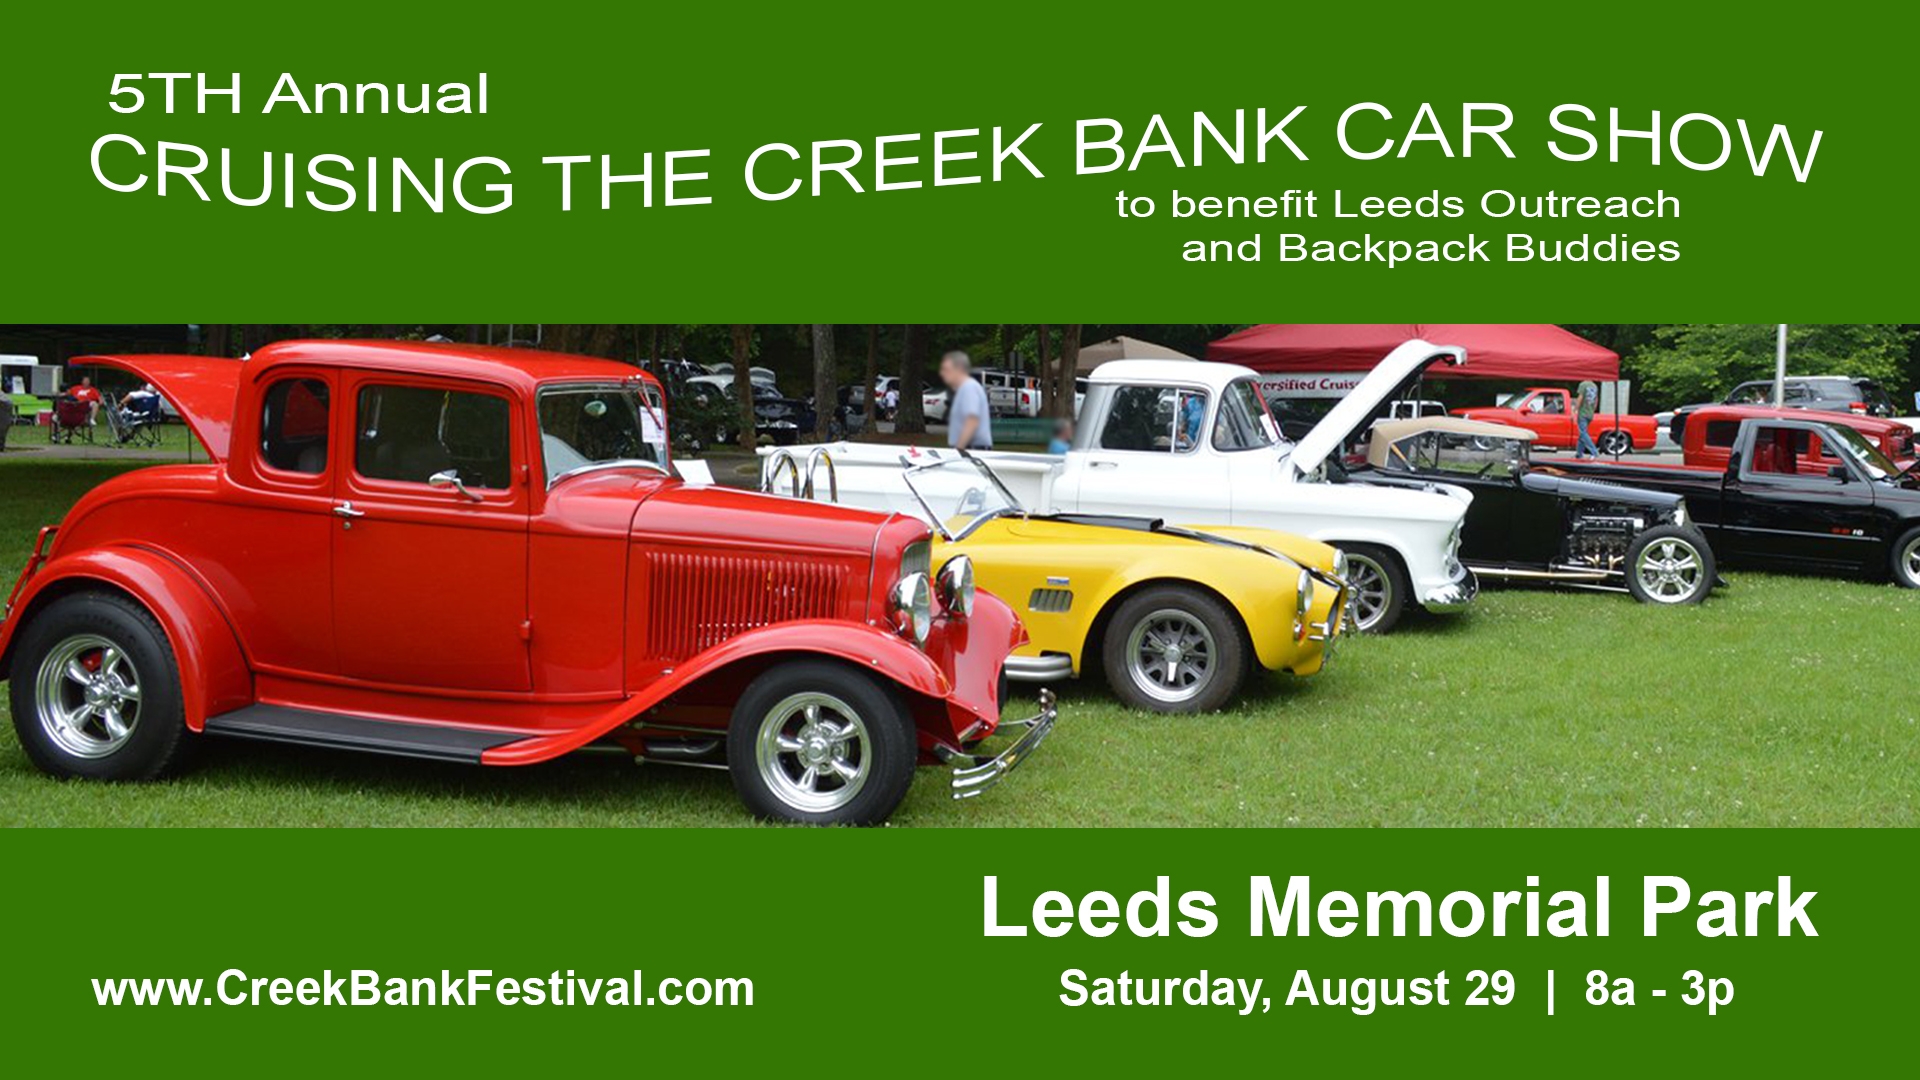 Leeds Creek Bank Festival Cancelled – Cruising the Creek Car Show Plans Continue | Leeds, AL-Leeds Area Chamber of Commerce announces the 26th Annual 